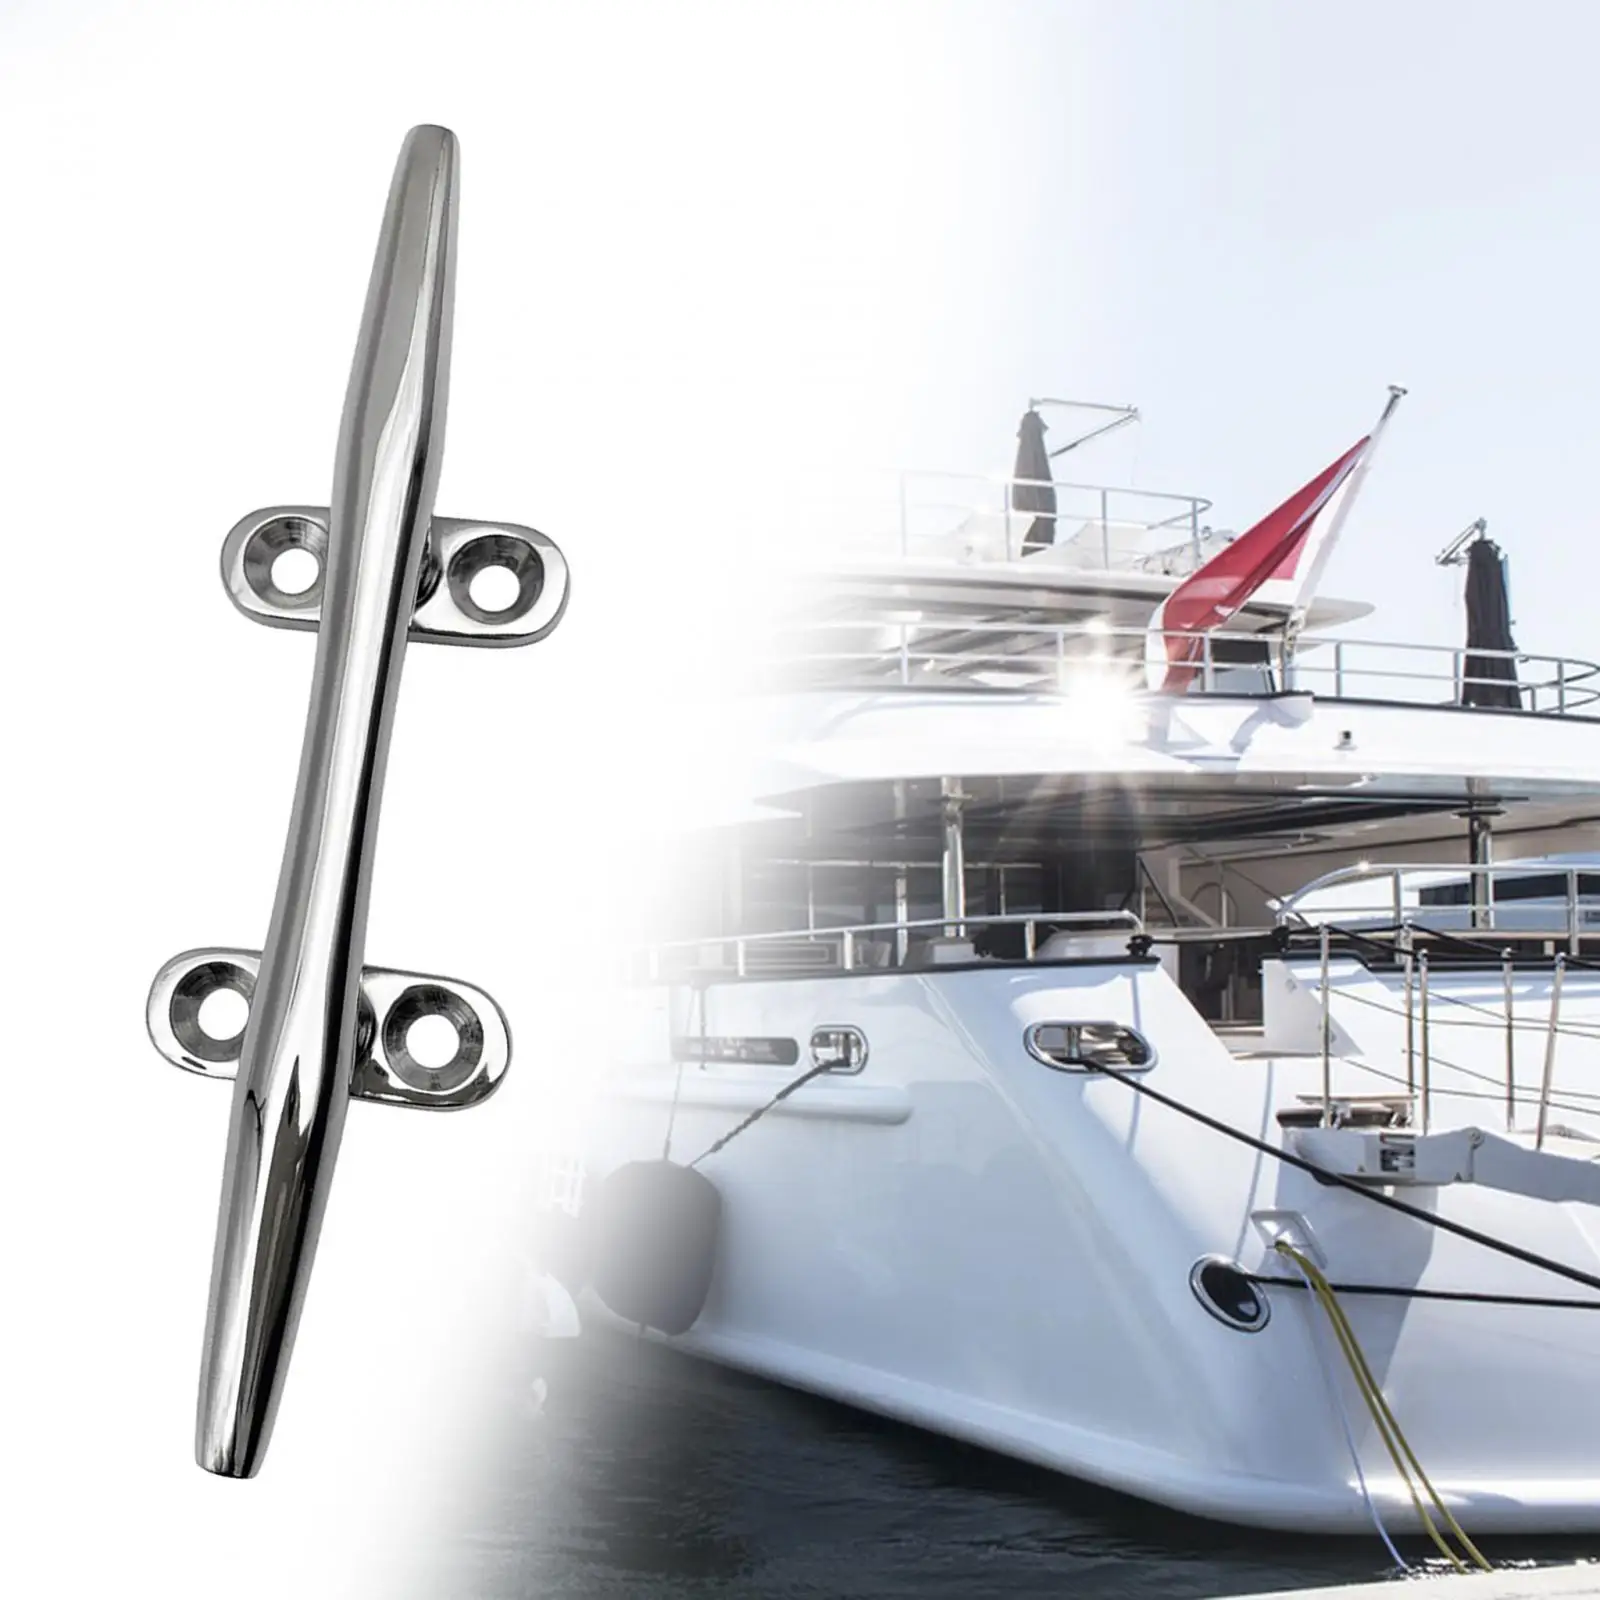 Marine Boat Hardware Premium Durable Screws Mount Wall Mount Heavy Duty Accessory for Boating Water Sports Ships Fishing